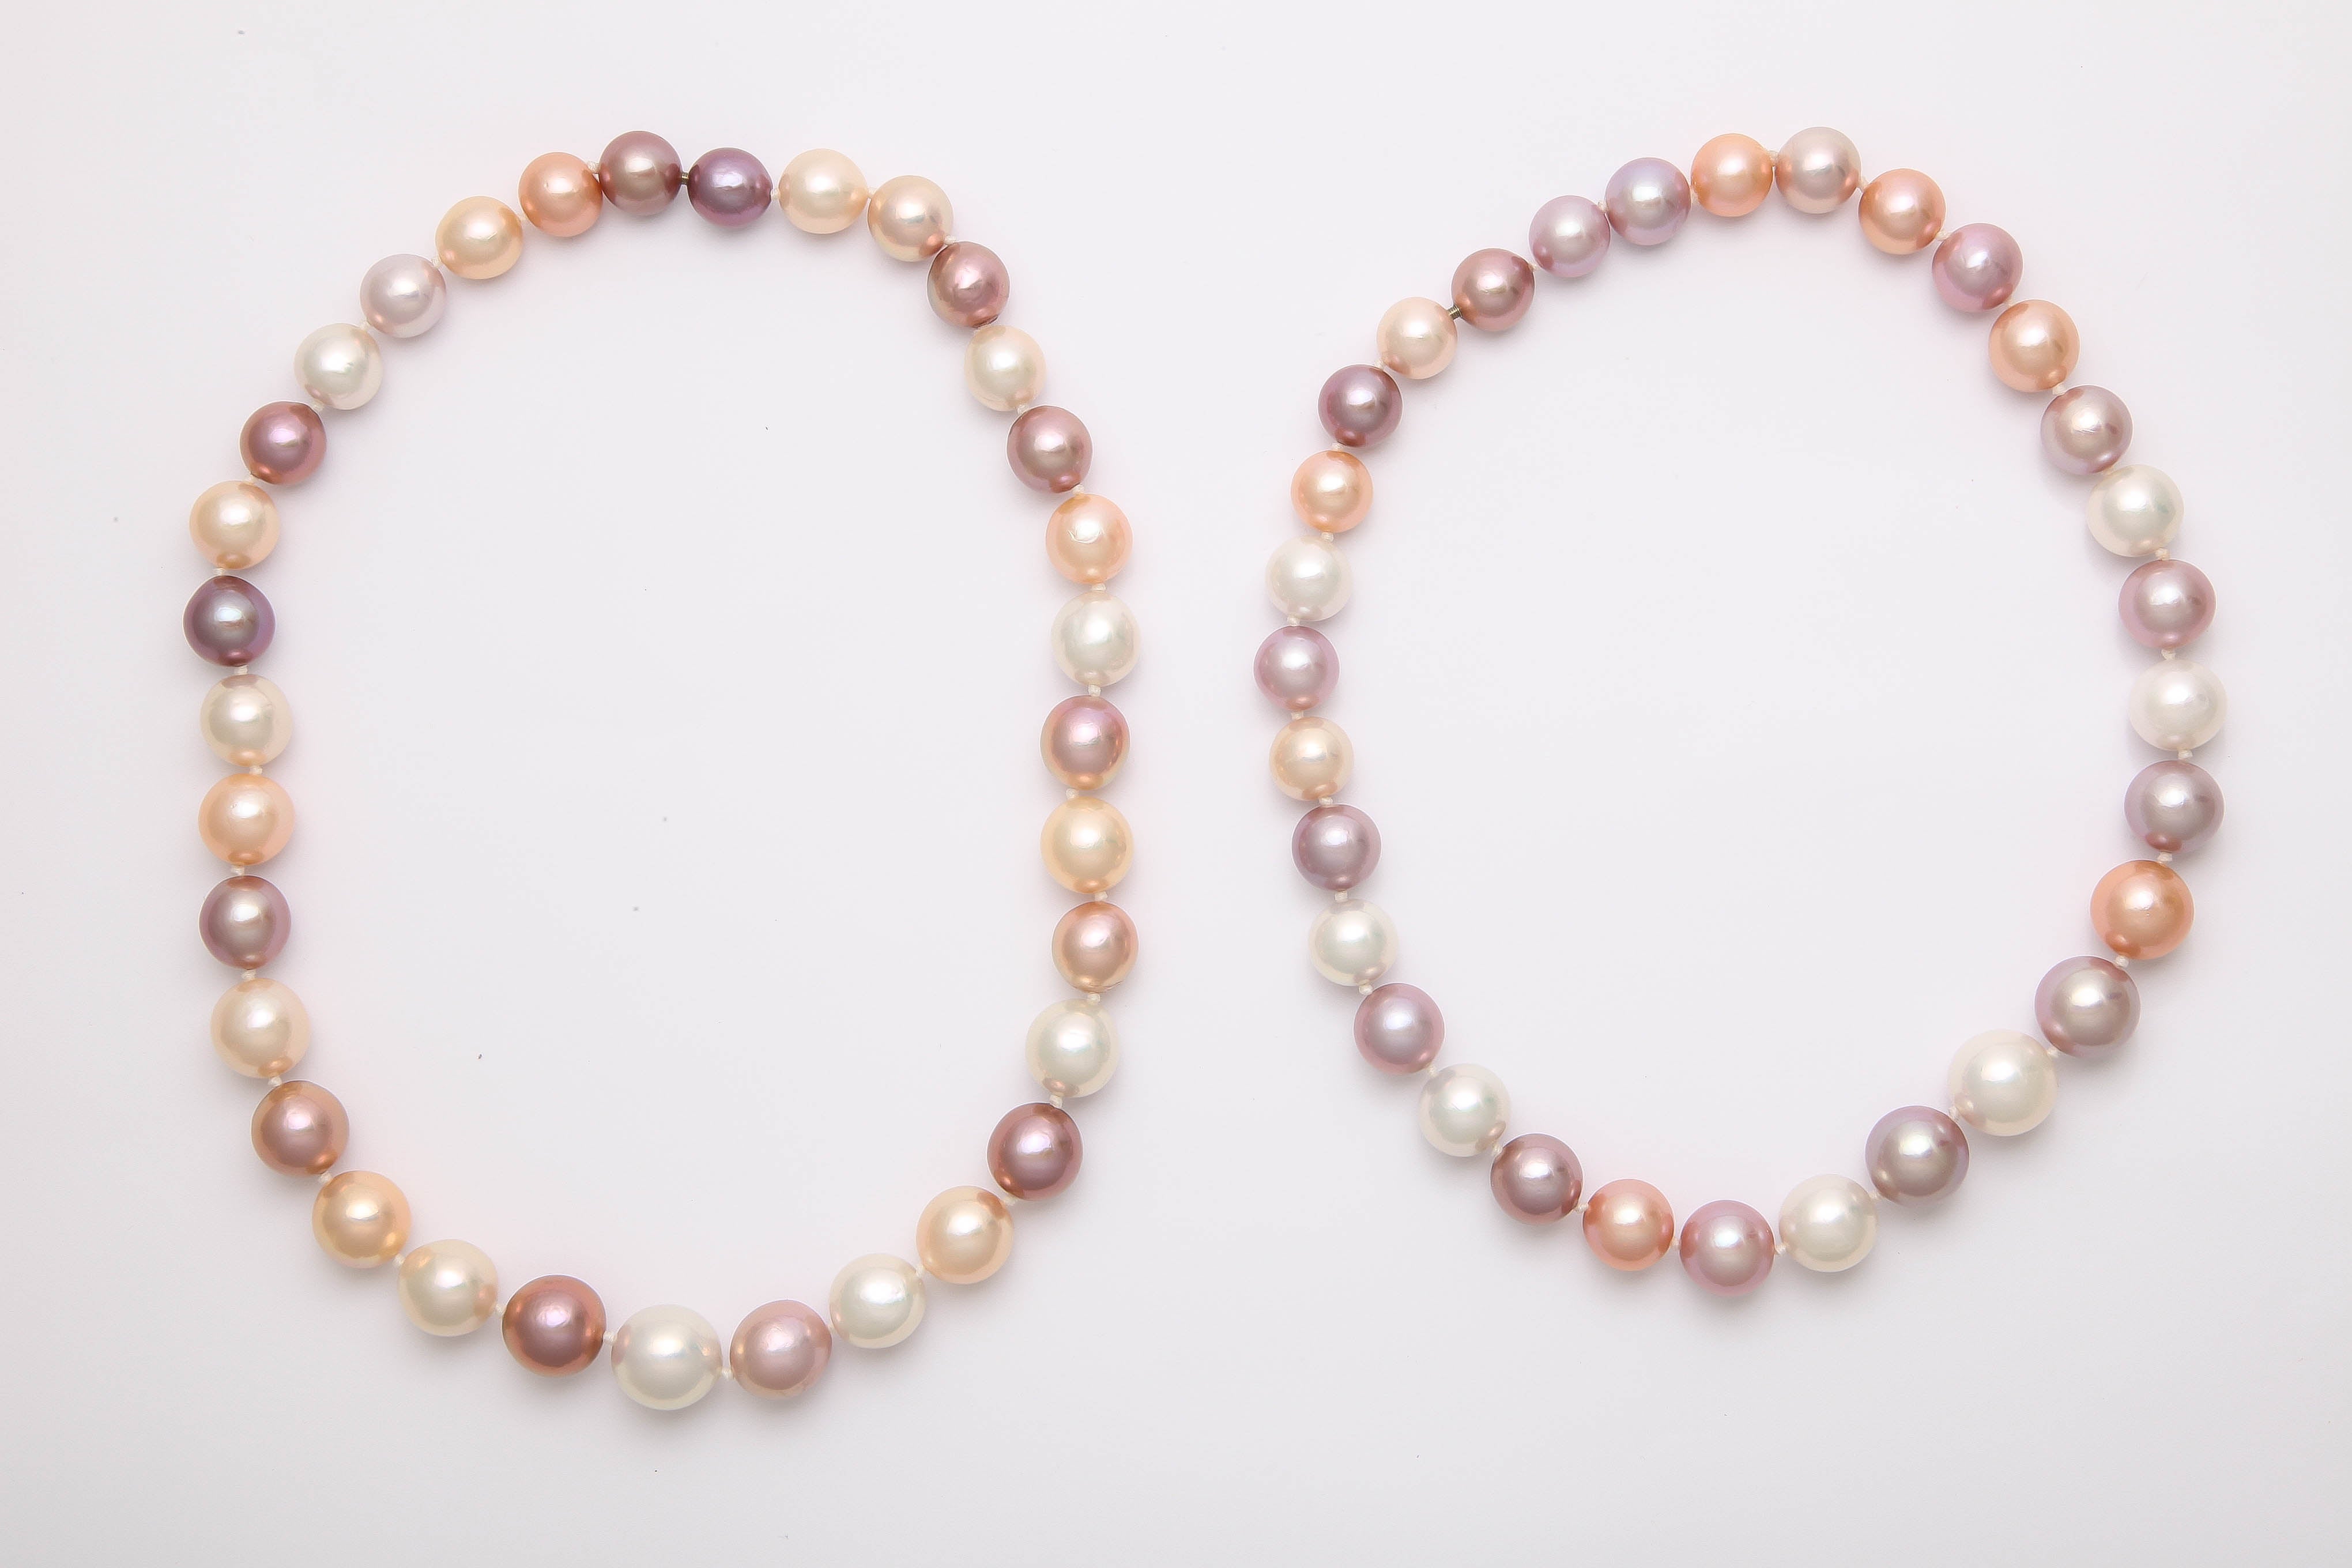 12-15mm high lustre pearls. They nest separately and join together with mystery screws to be worn as a single short necklaces, 2 short necklaces or as 1 long necklace.